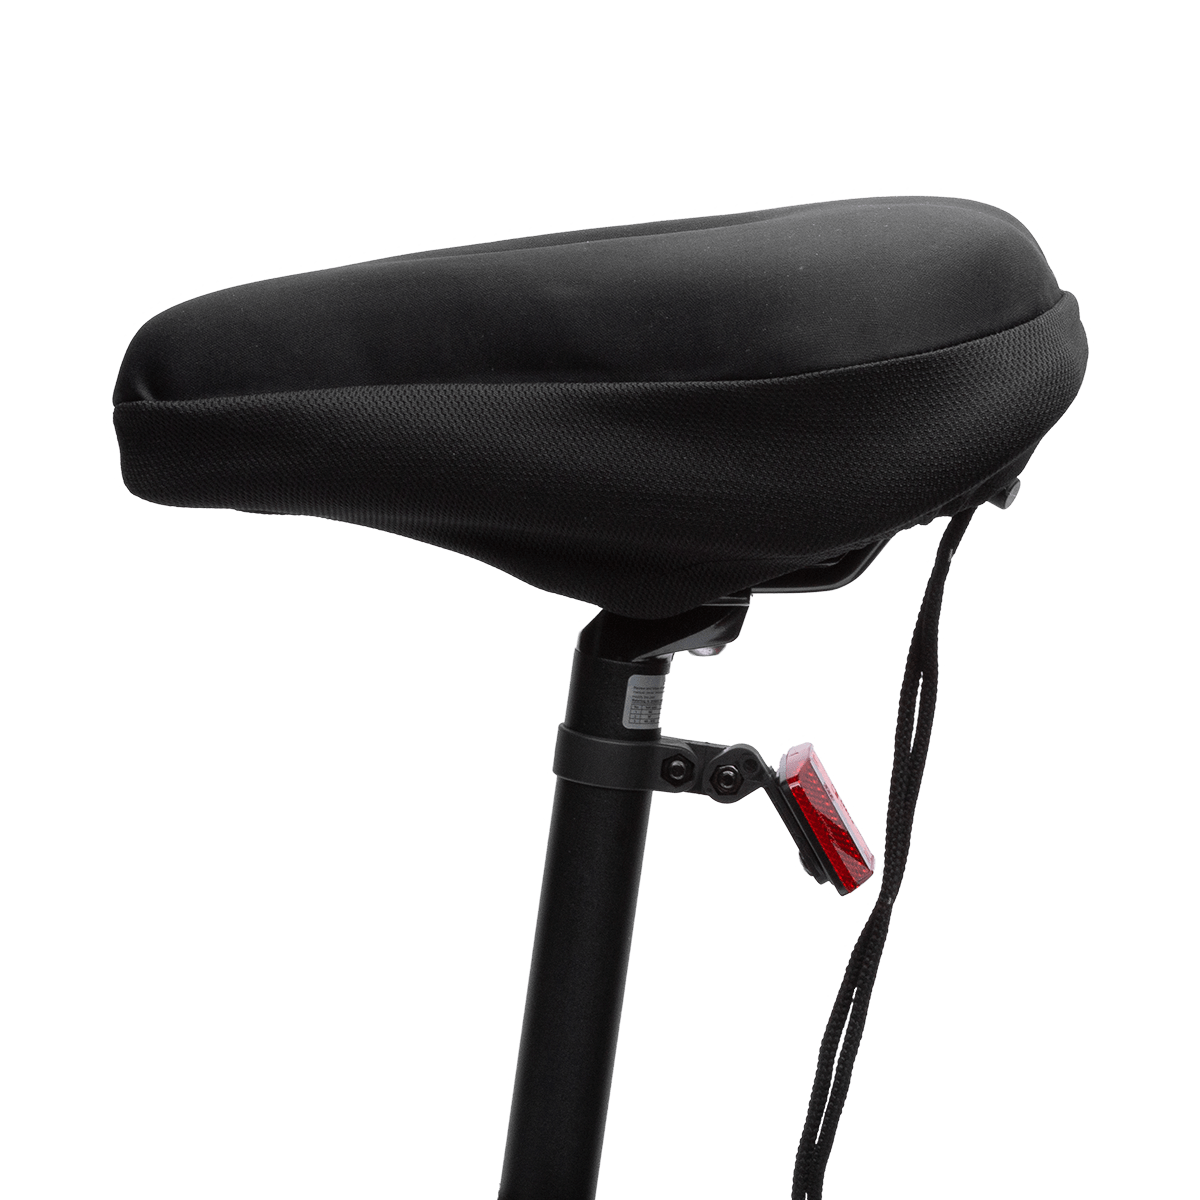 Buy Firefox Saddle Cover Memory Foam Bike Accessories Online for Best Price 